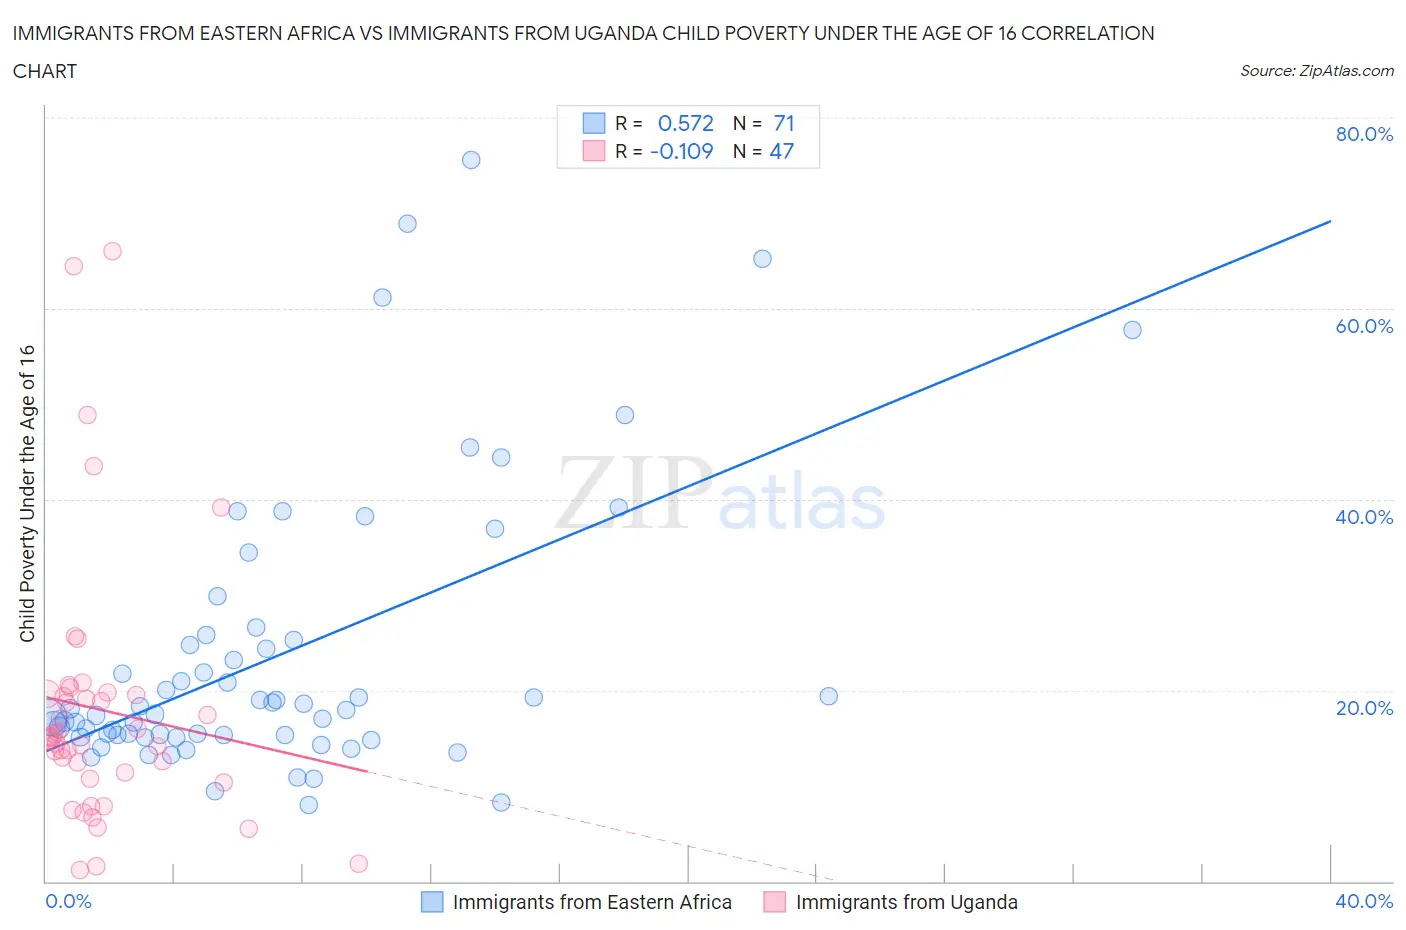 Immigrants from Eastern Africa vs Immigrants from Uganda Child Poverty Under the Age of 16